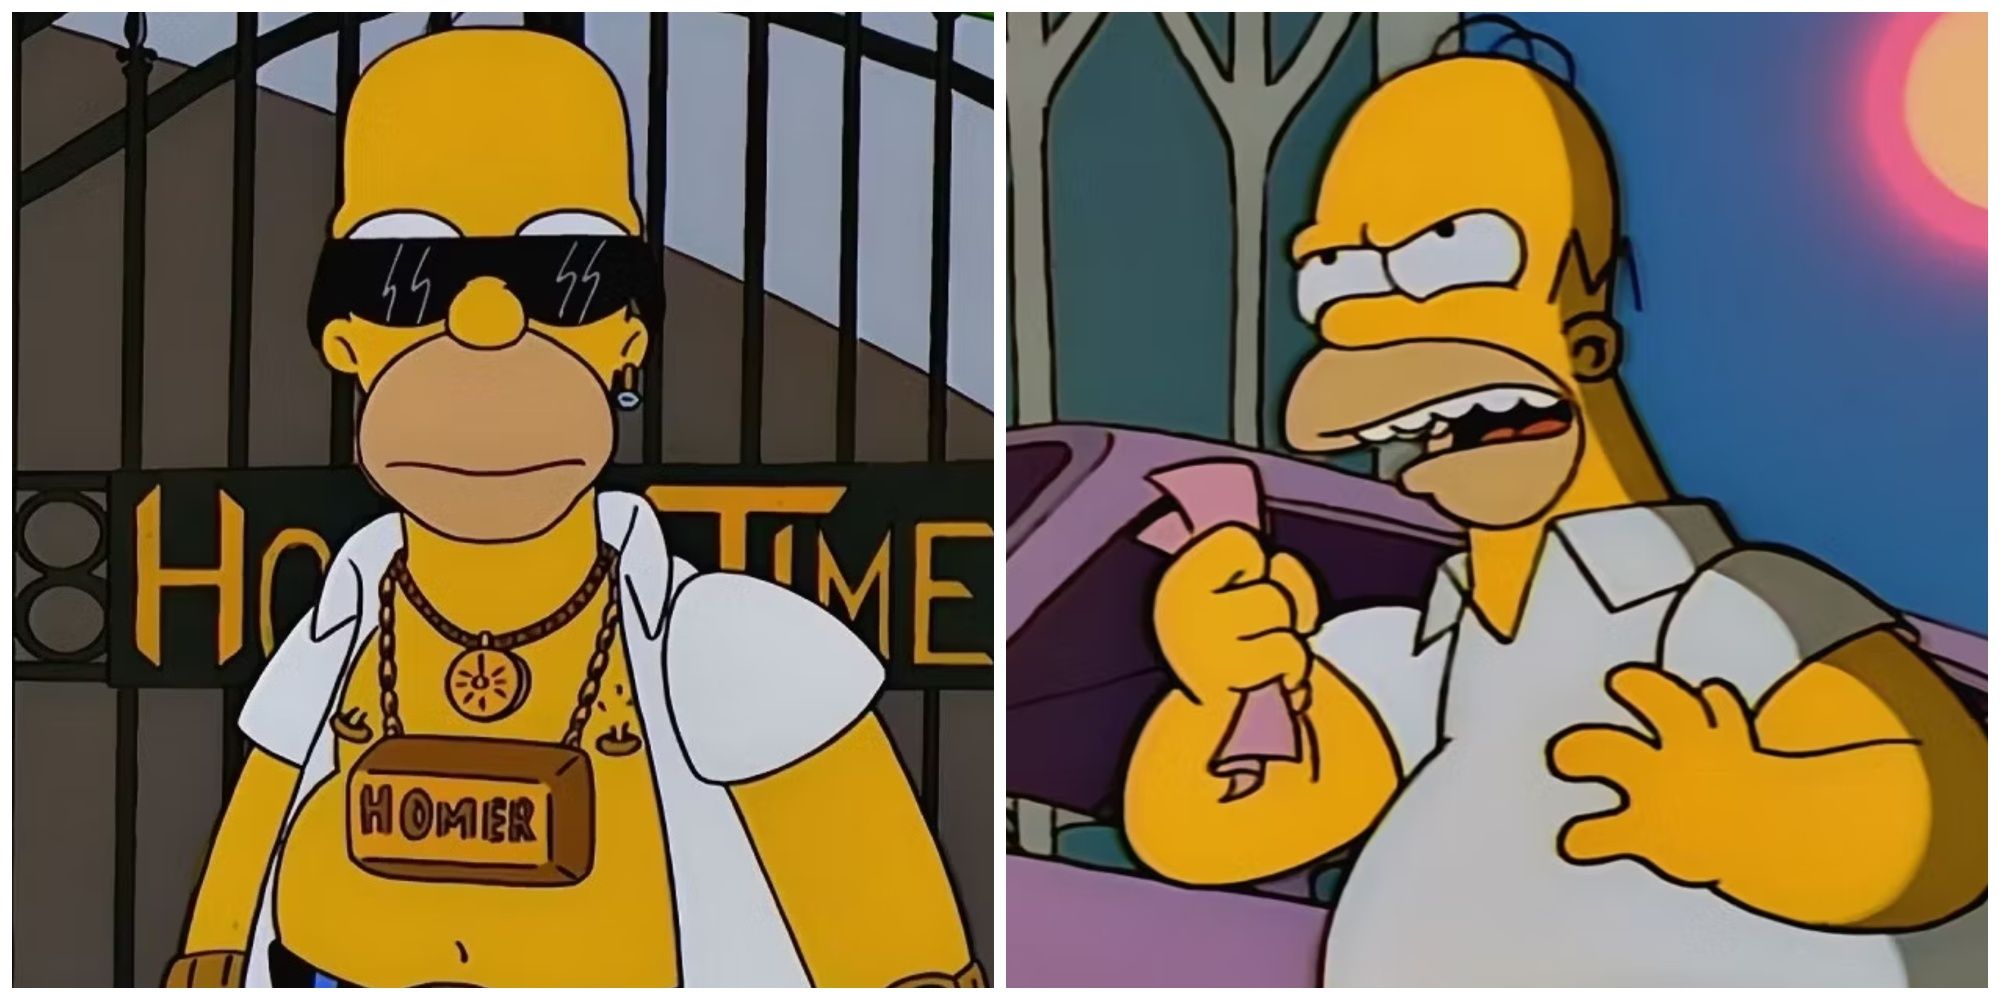 Homer in The Simpsons